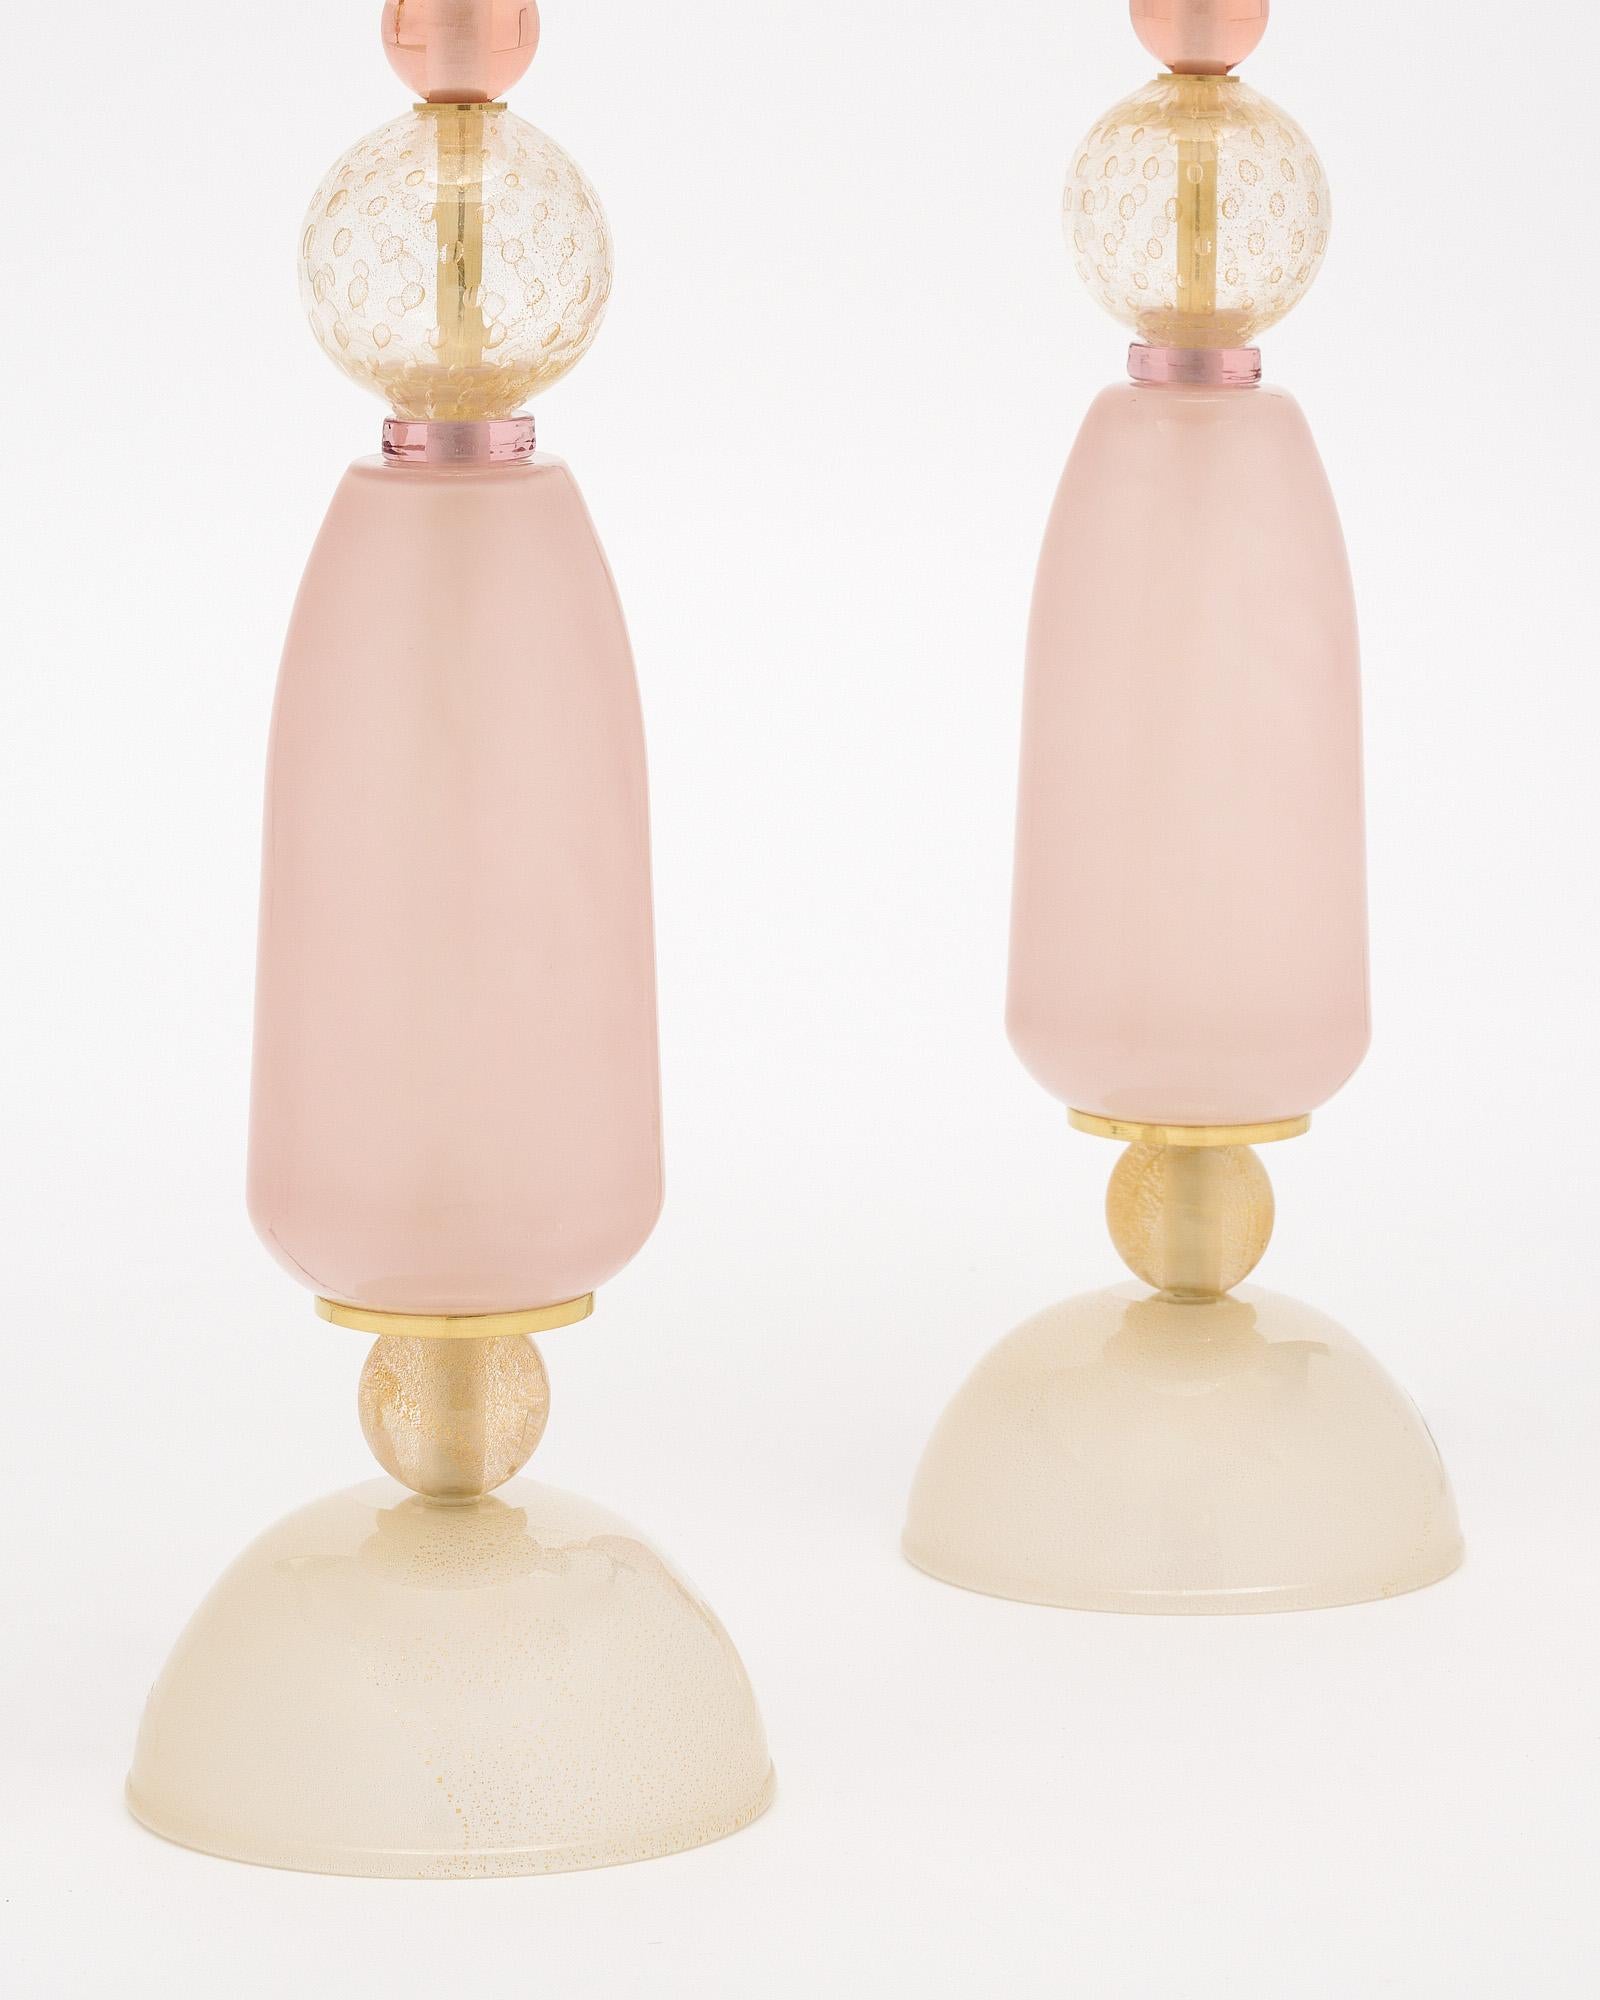 Pair of hand-blown Murano glass lamps featuring unique glass components on a brass structure. In the style of iconic Italian designer Ettore Sotsass. We love the geometric forms and strong impact this pair brings to a space. We are drawn to the